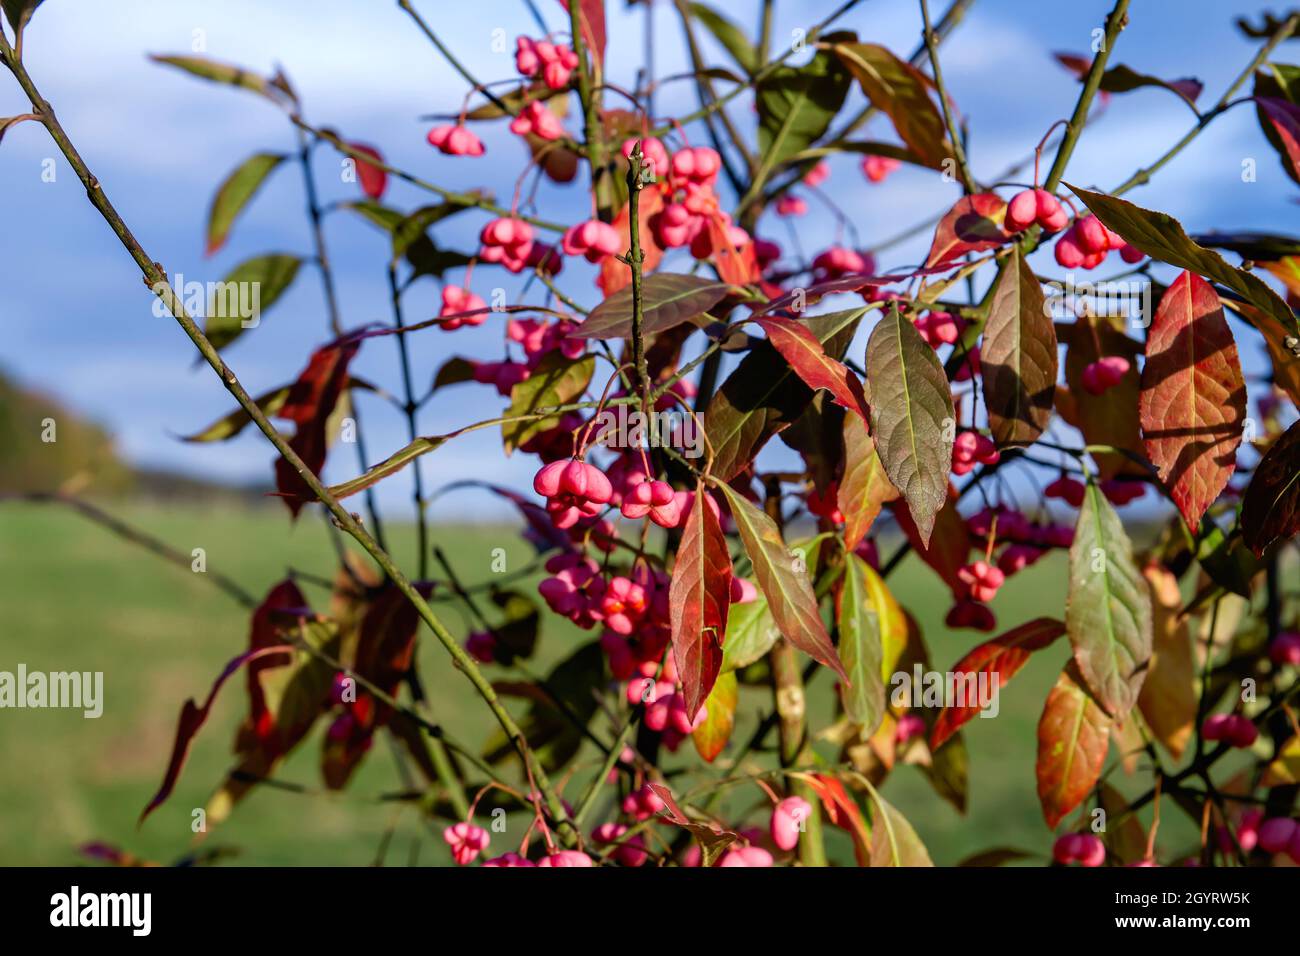 Euonymus europaeus European spindle deep pinl colored seed capsules and colorful autumn foliage Stock Photo